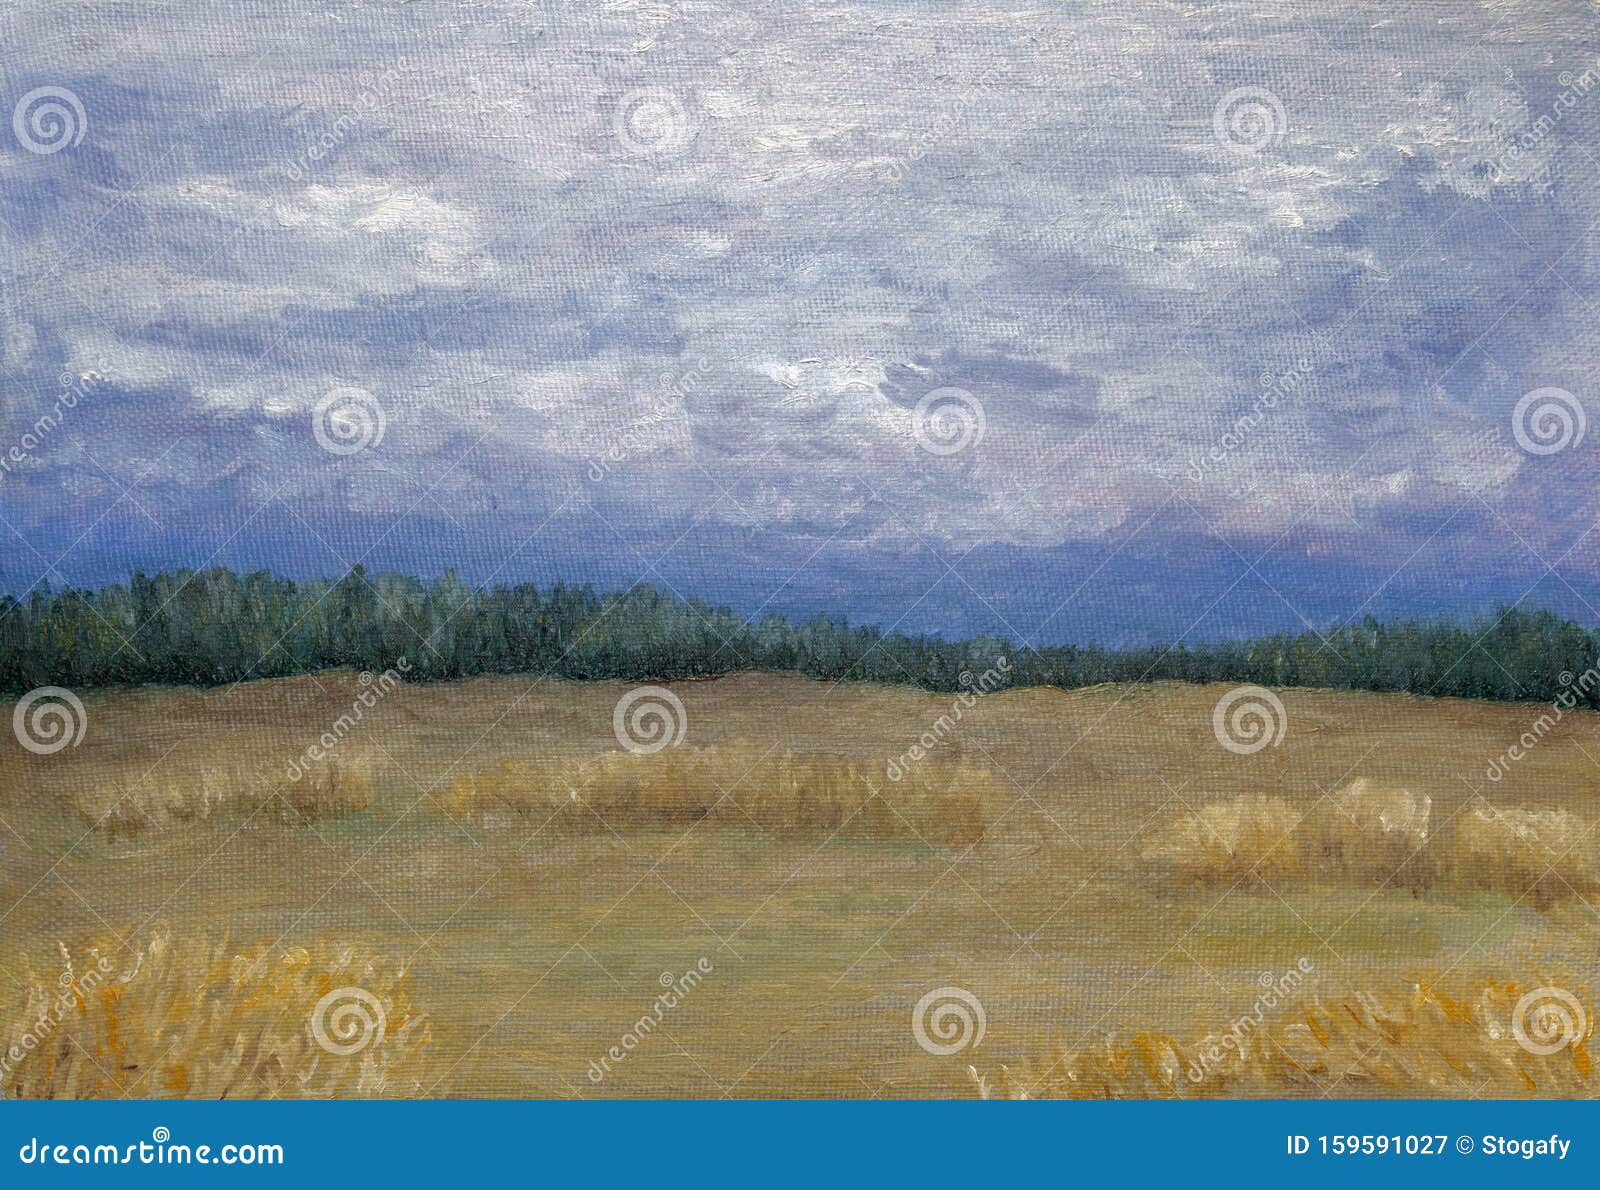 Painting Of Dark Cloudy Sky Over Yellow Grassy Field With Forest Stock Illustration Illustration Of Clouds Technique